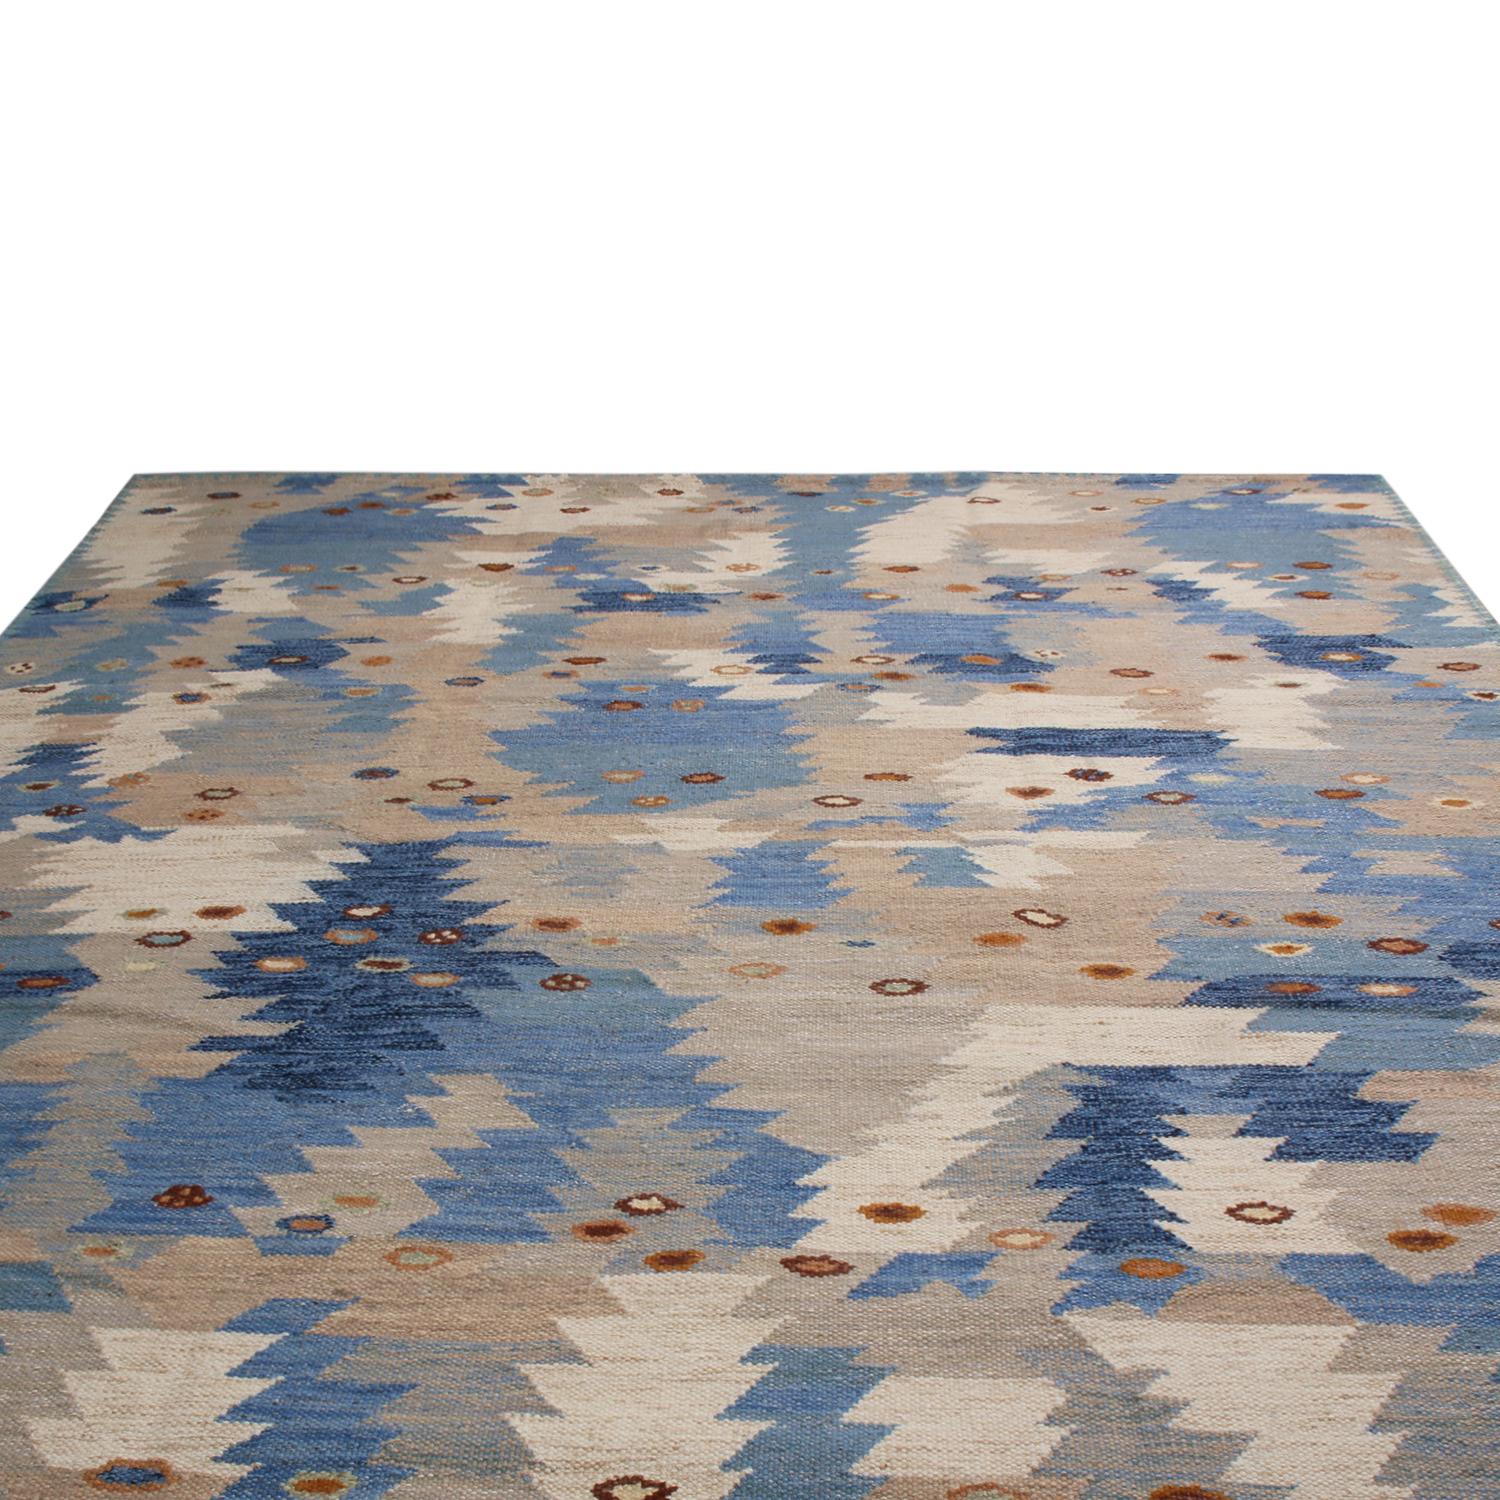 Originating from India, this hand knotted pile rug hails from Rug & Kilim’s Scandinavian-inspired collection, featuring a distinct tribal geometric all-over field design in multi-tonal blue colorway with luminous brown accents; highlighted by